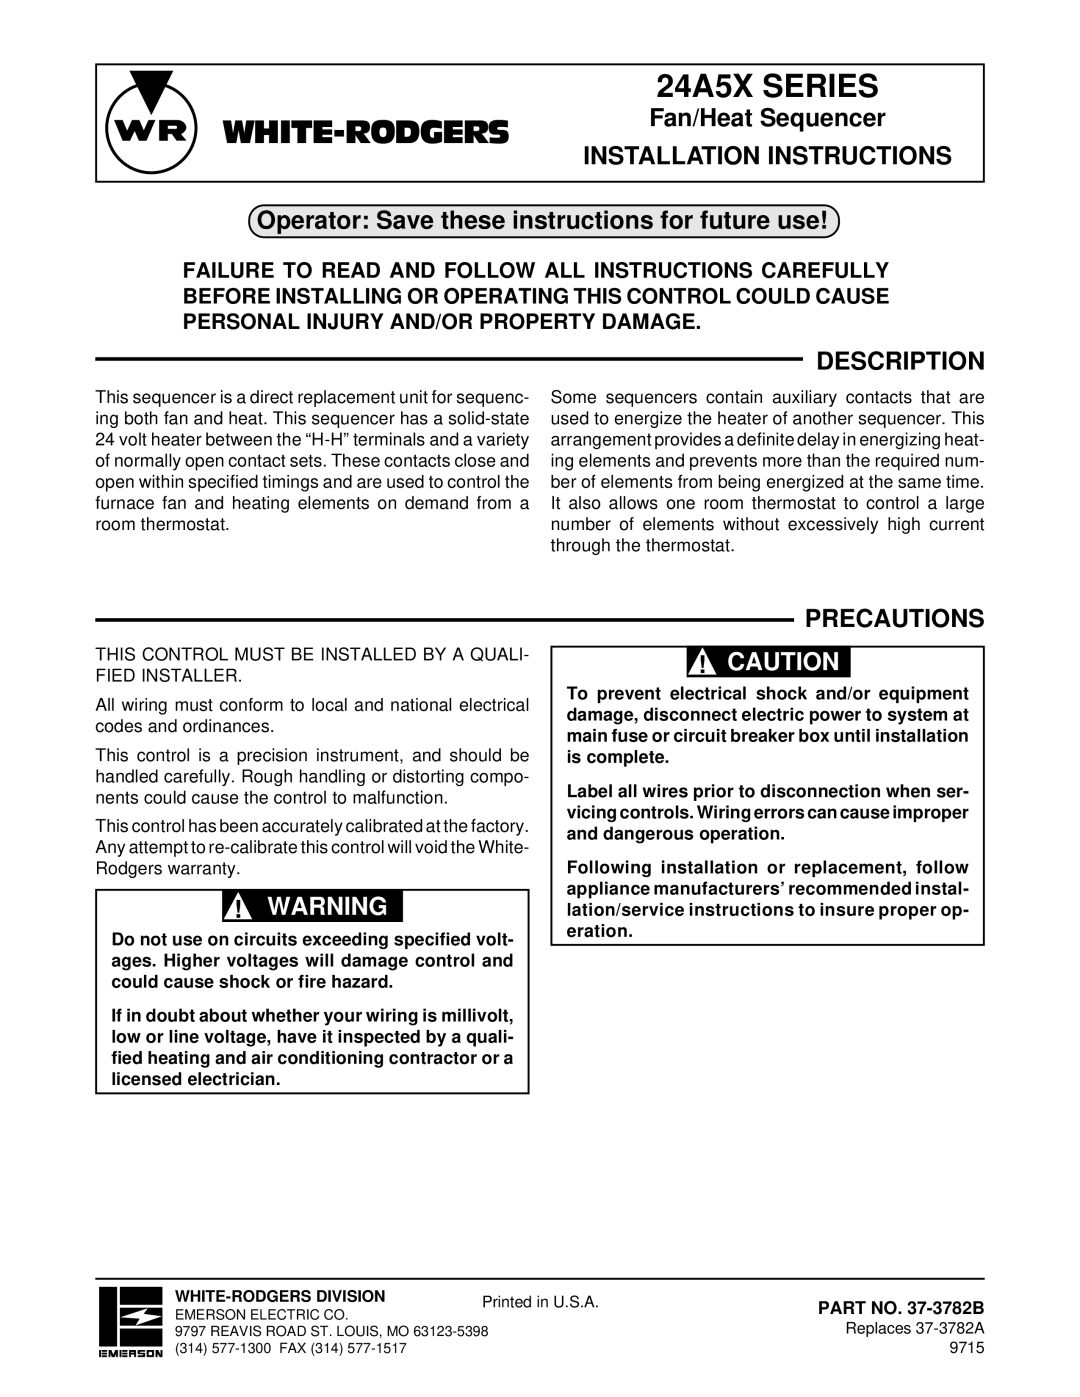 White Rodgers installation instructions 24A5X SERIES, White-Rodgers, Operator Save these instructions for future use 